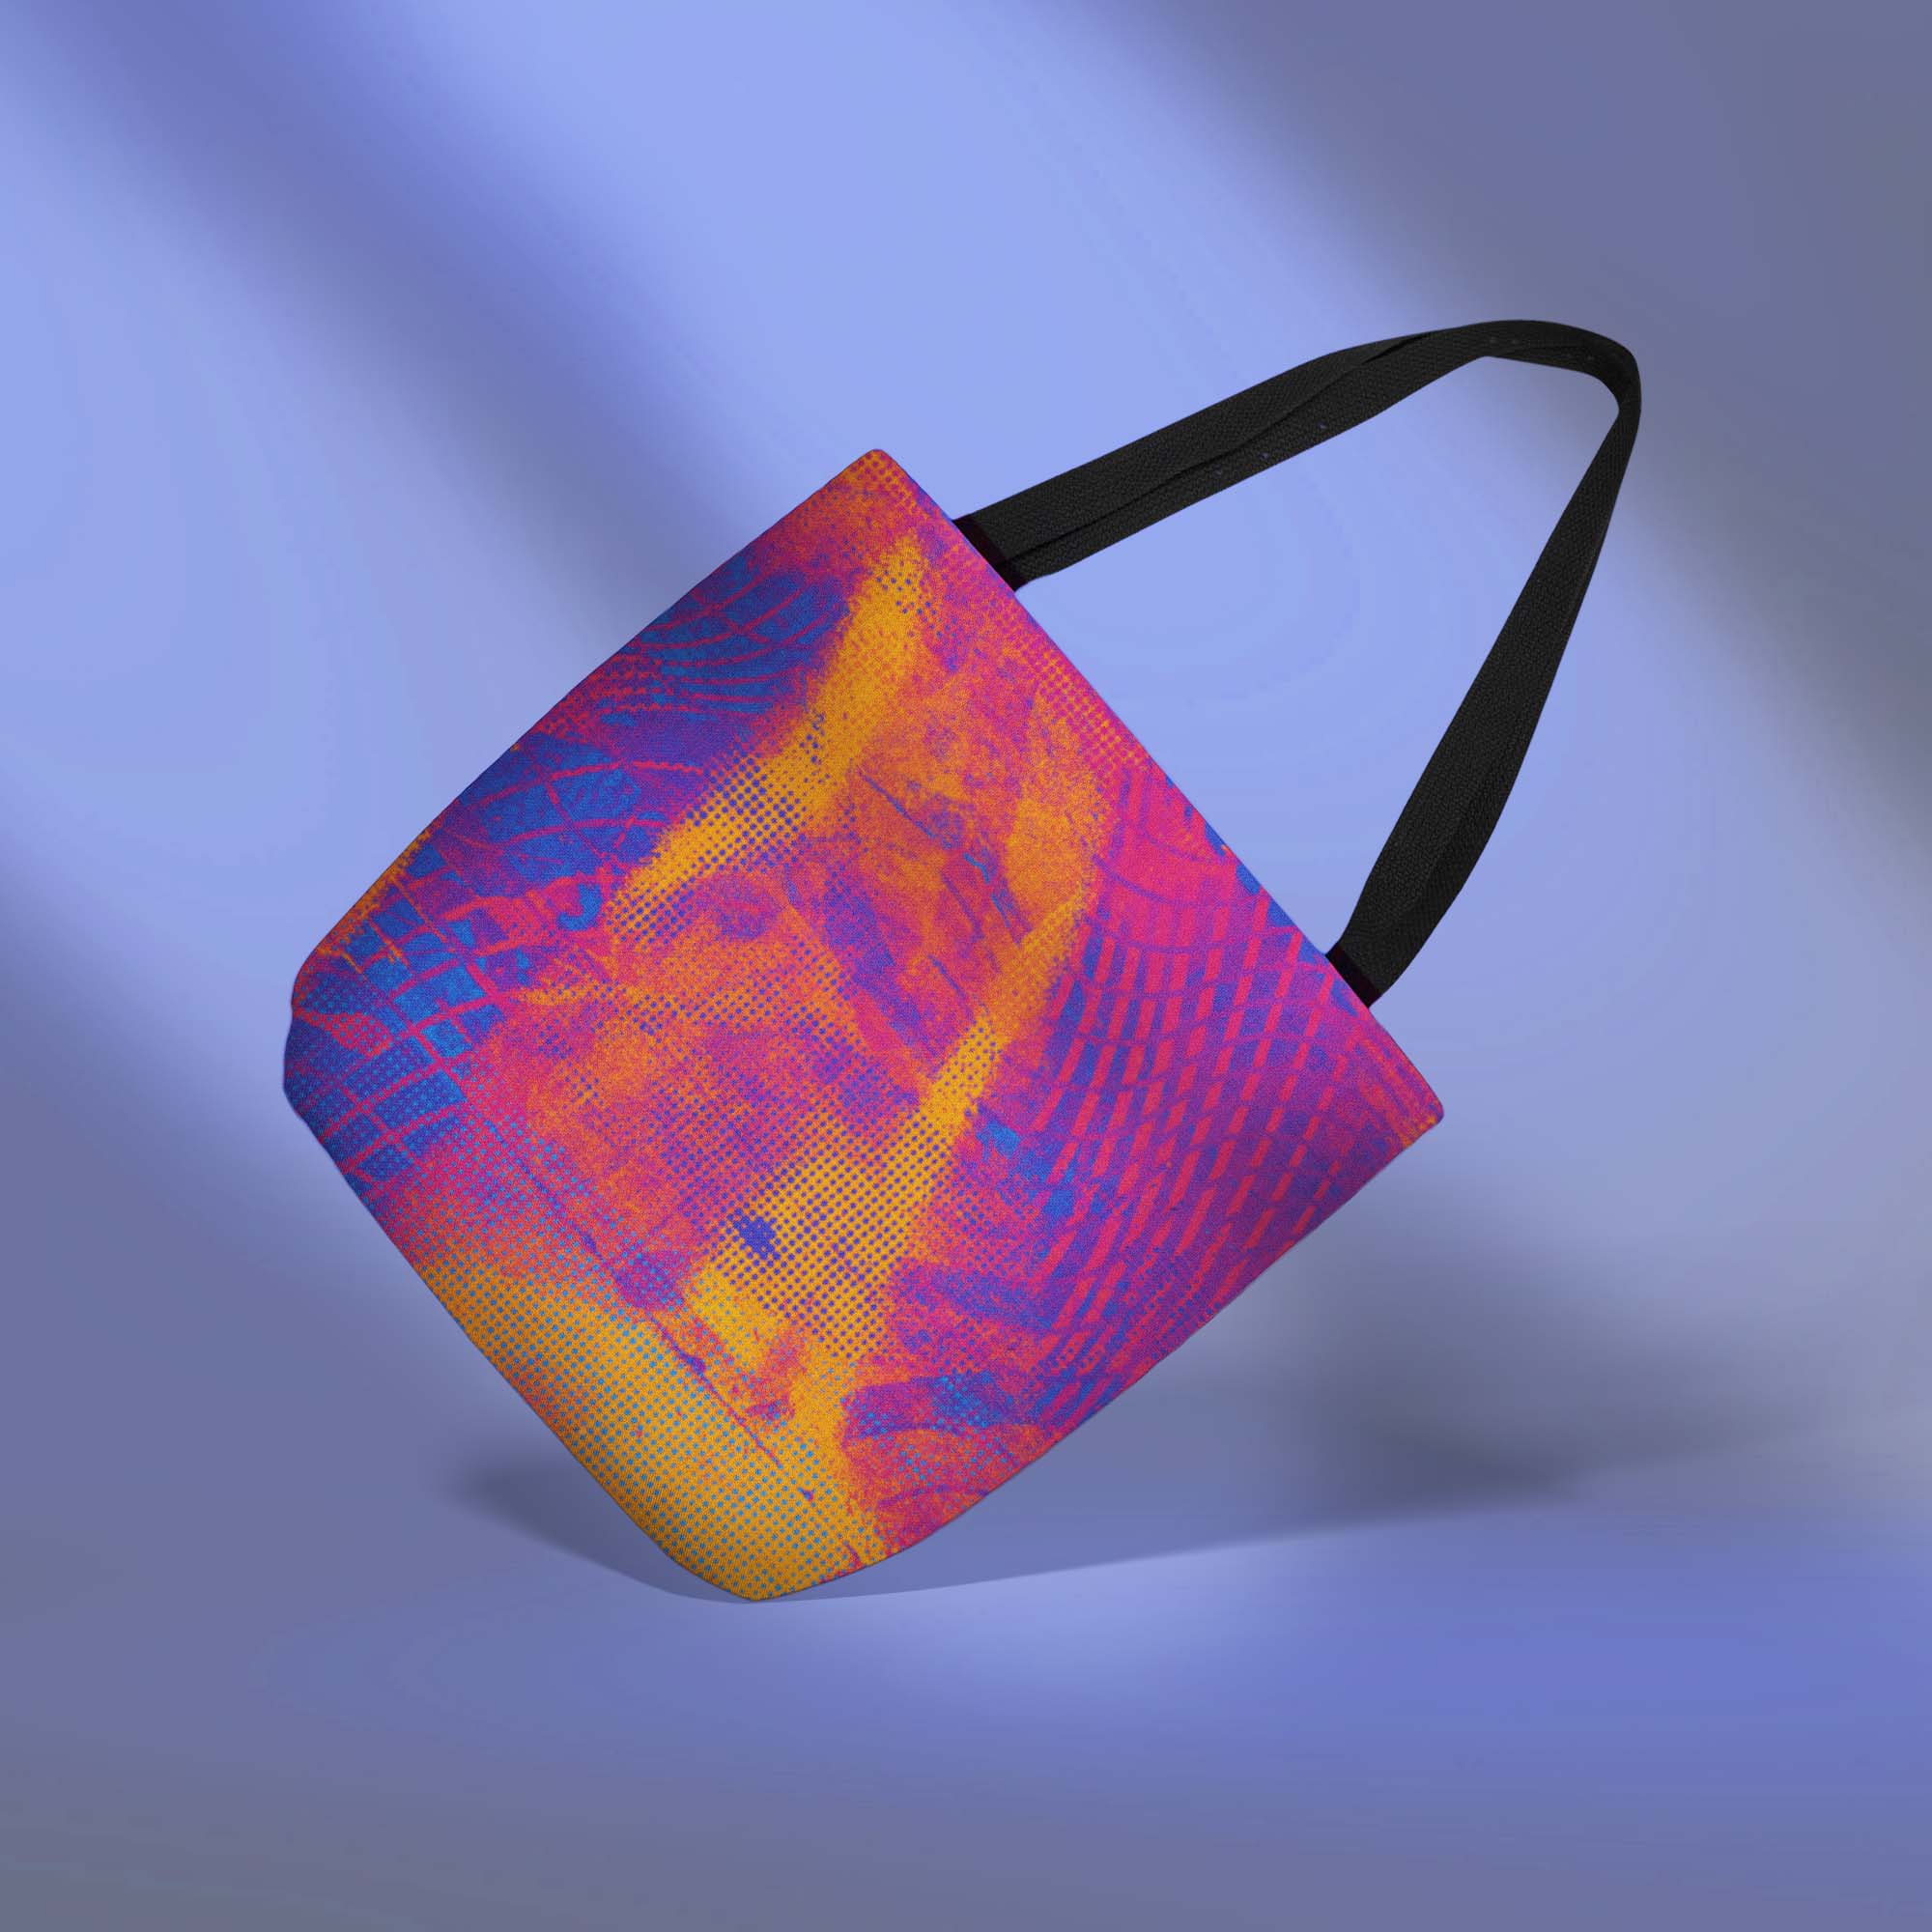 Psychedelic Grunge Tote